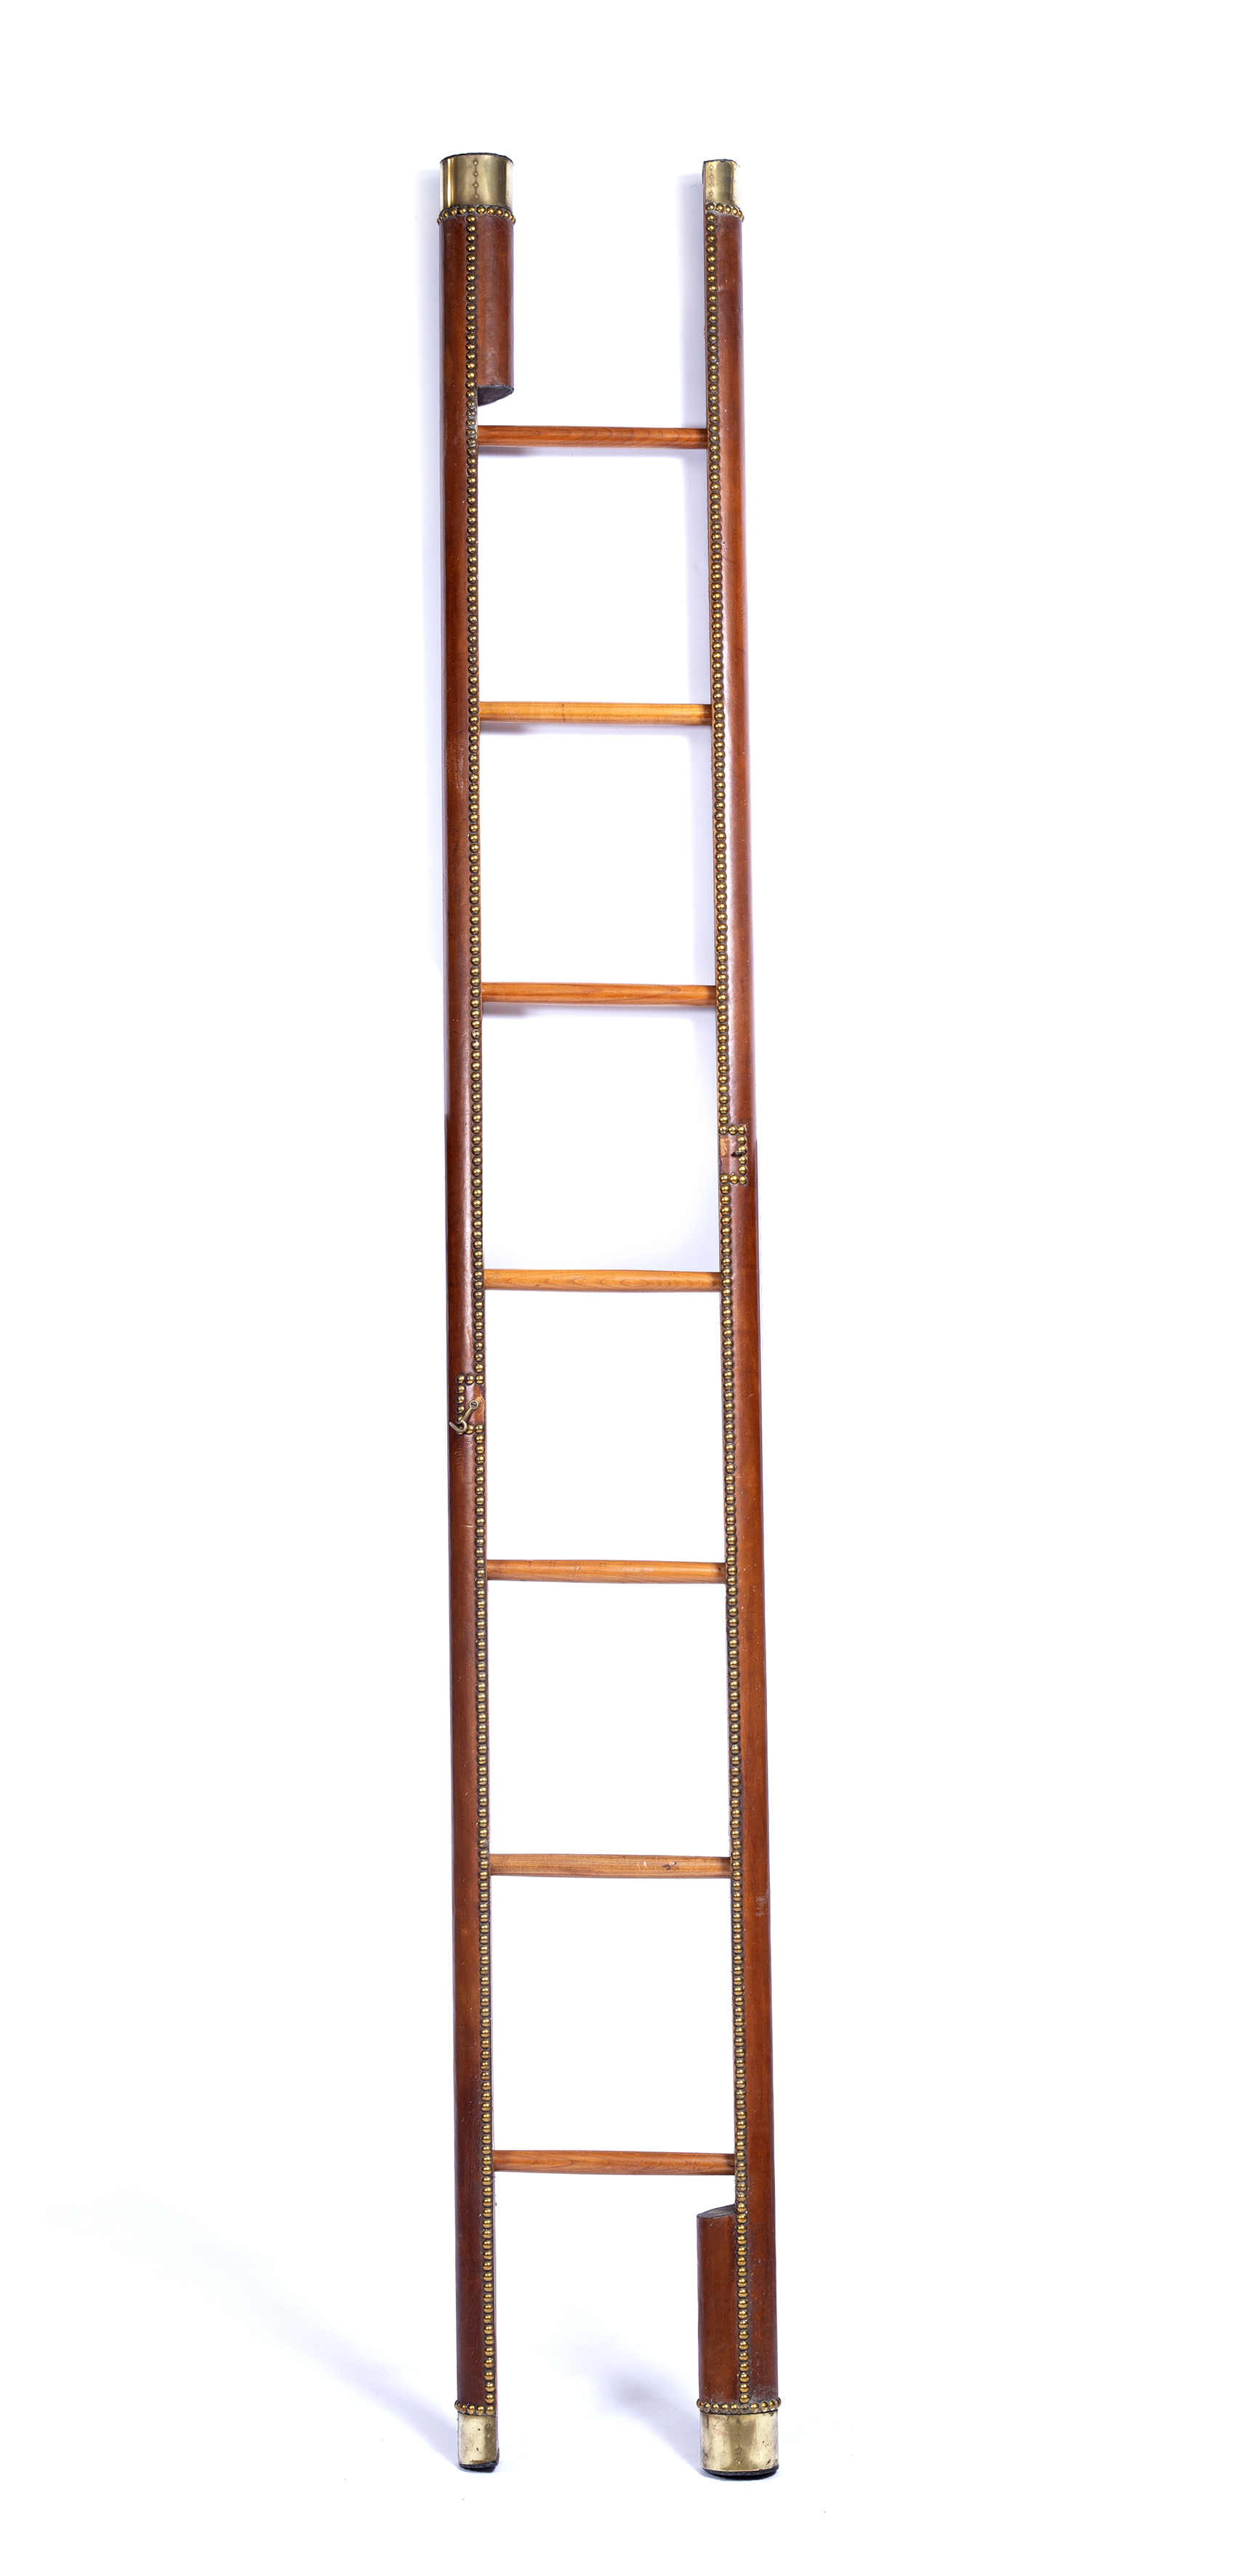 A seven rung folding library pole ladder c1975 by Arthur Brett and Sons with outer brass studded